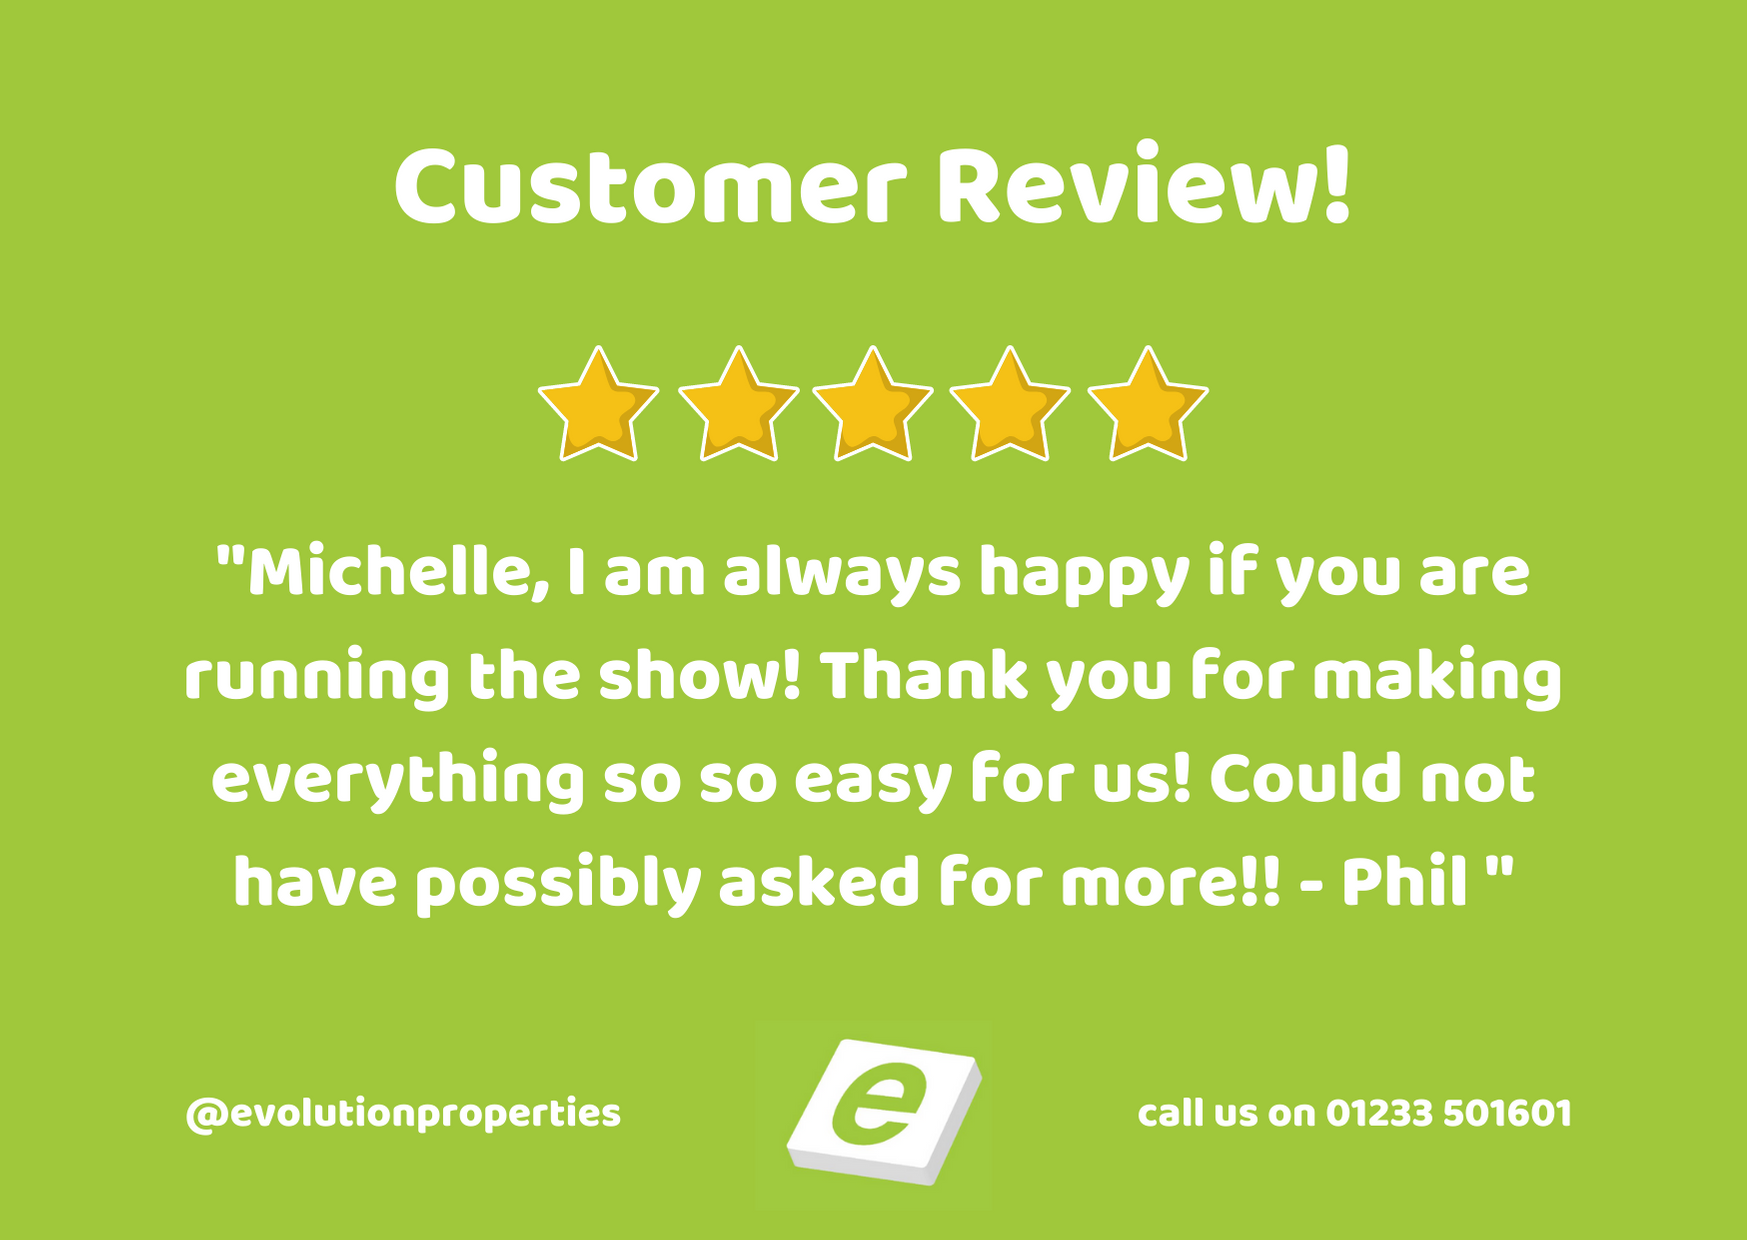 Five star feedback on our...